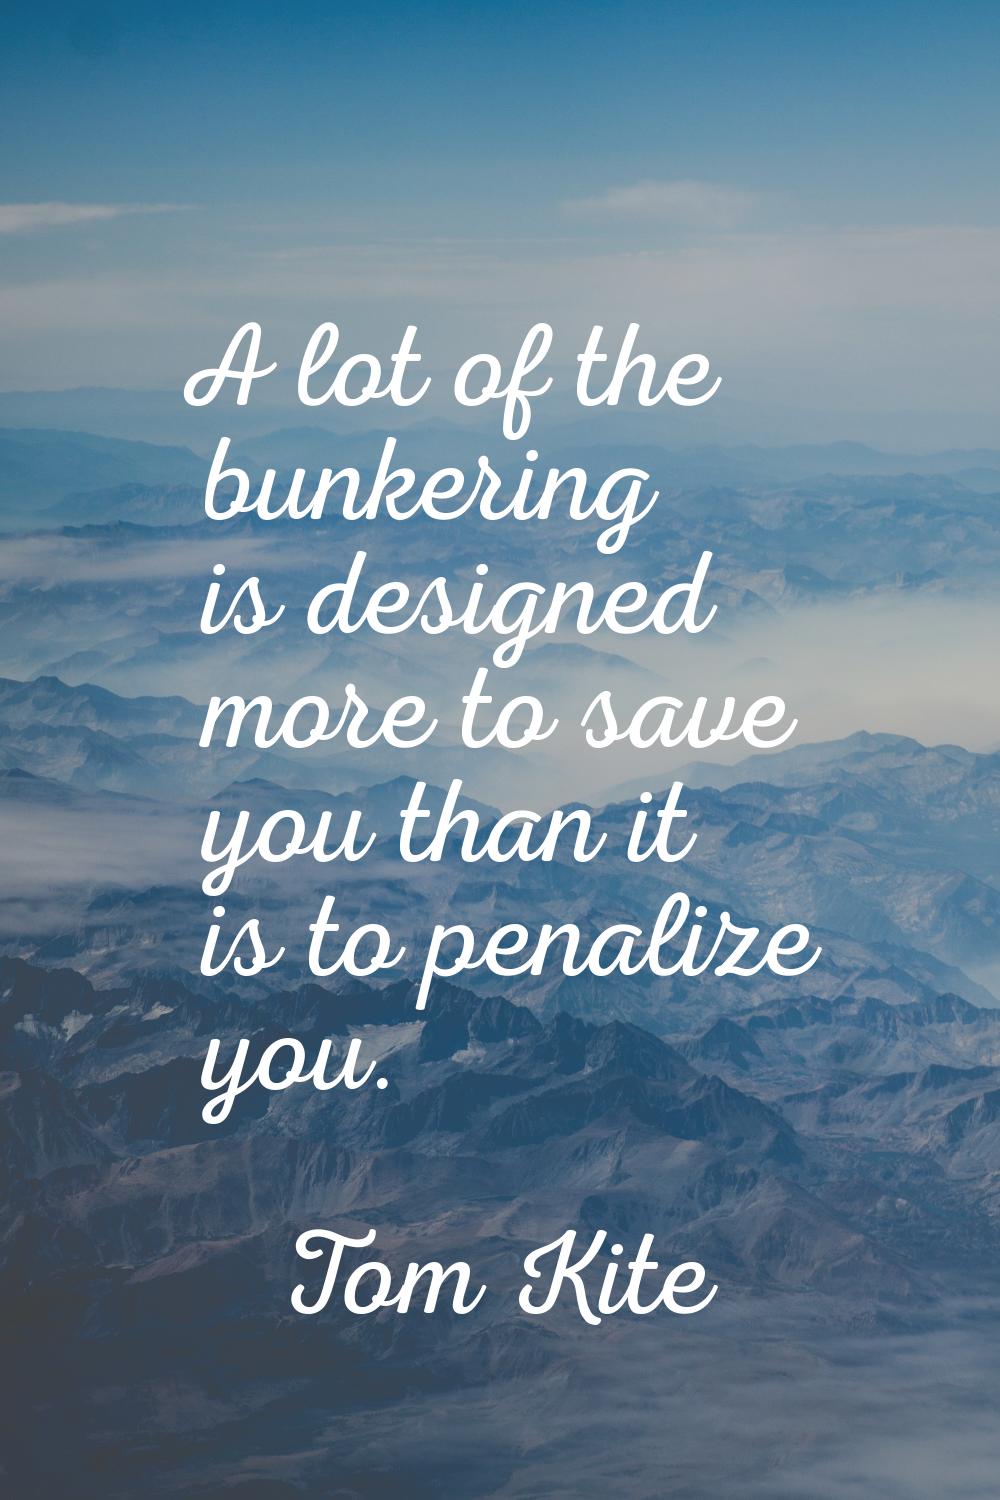 A lot of the bunkering is designed more to save you than it is to penalize you.